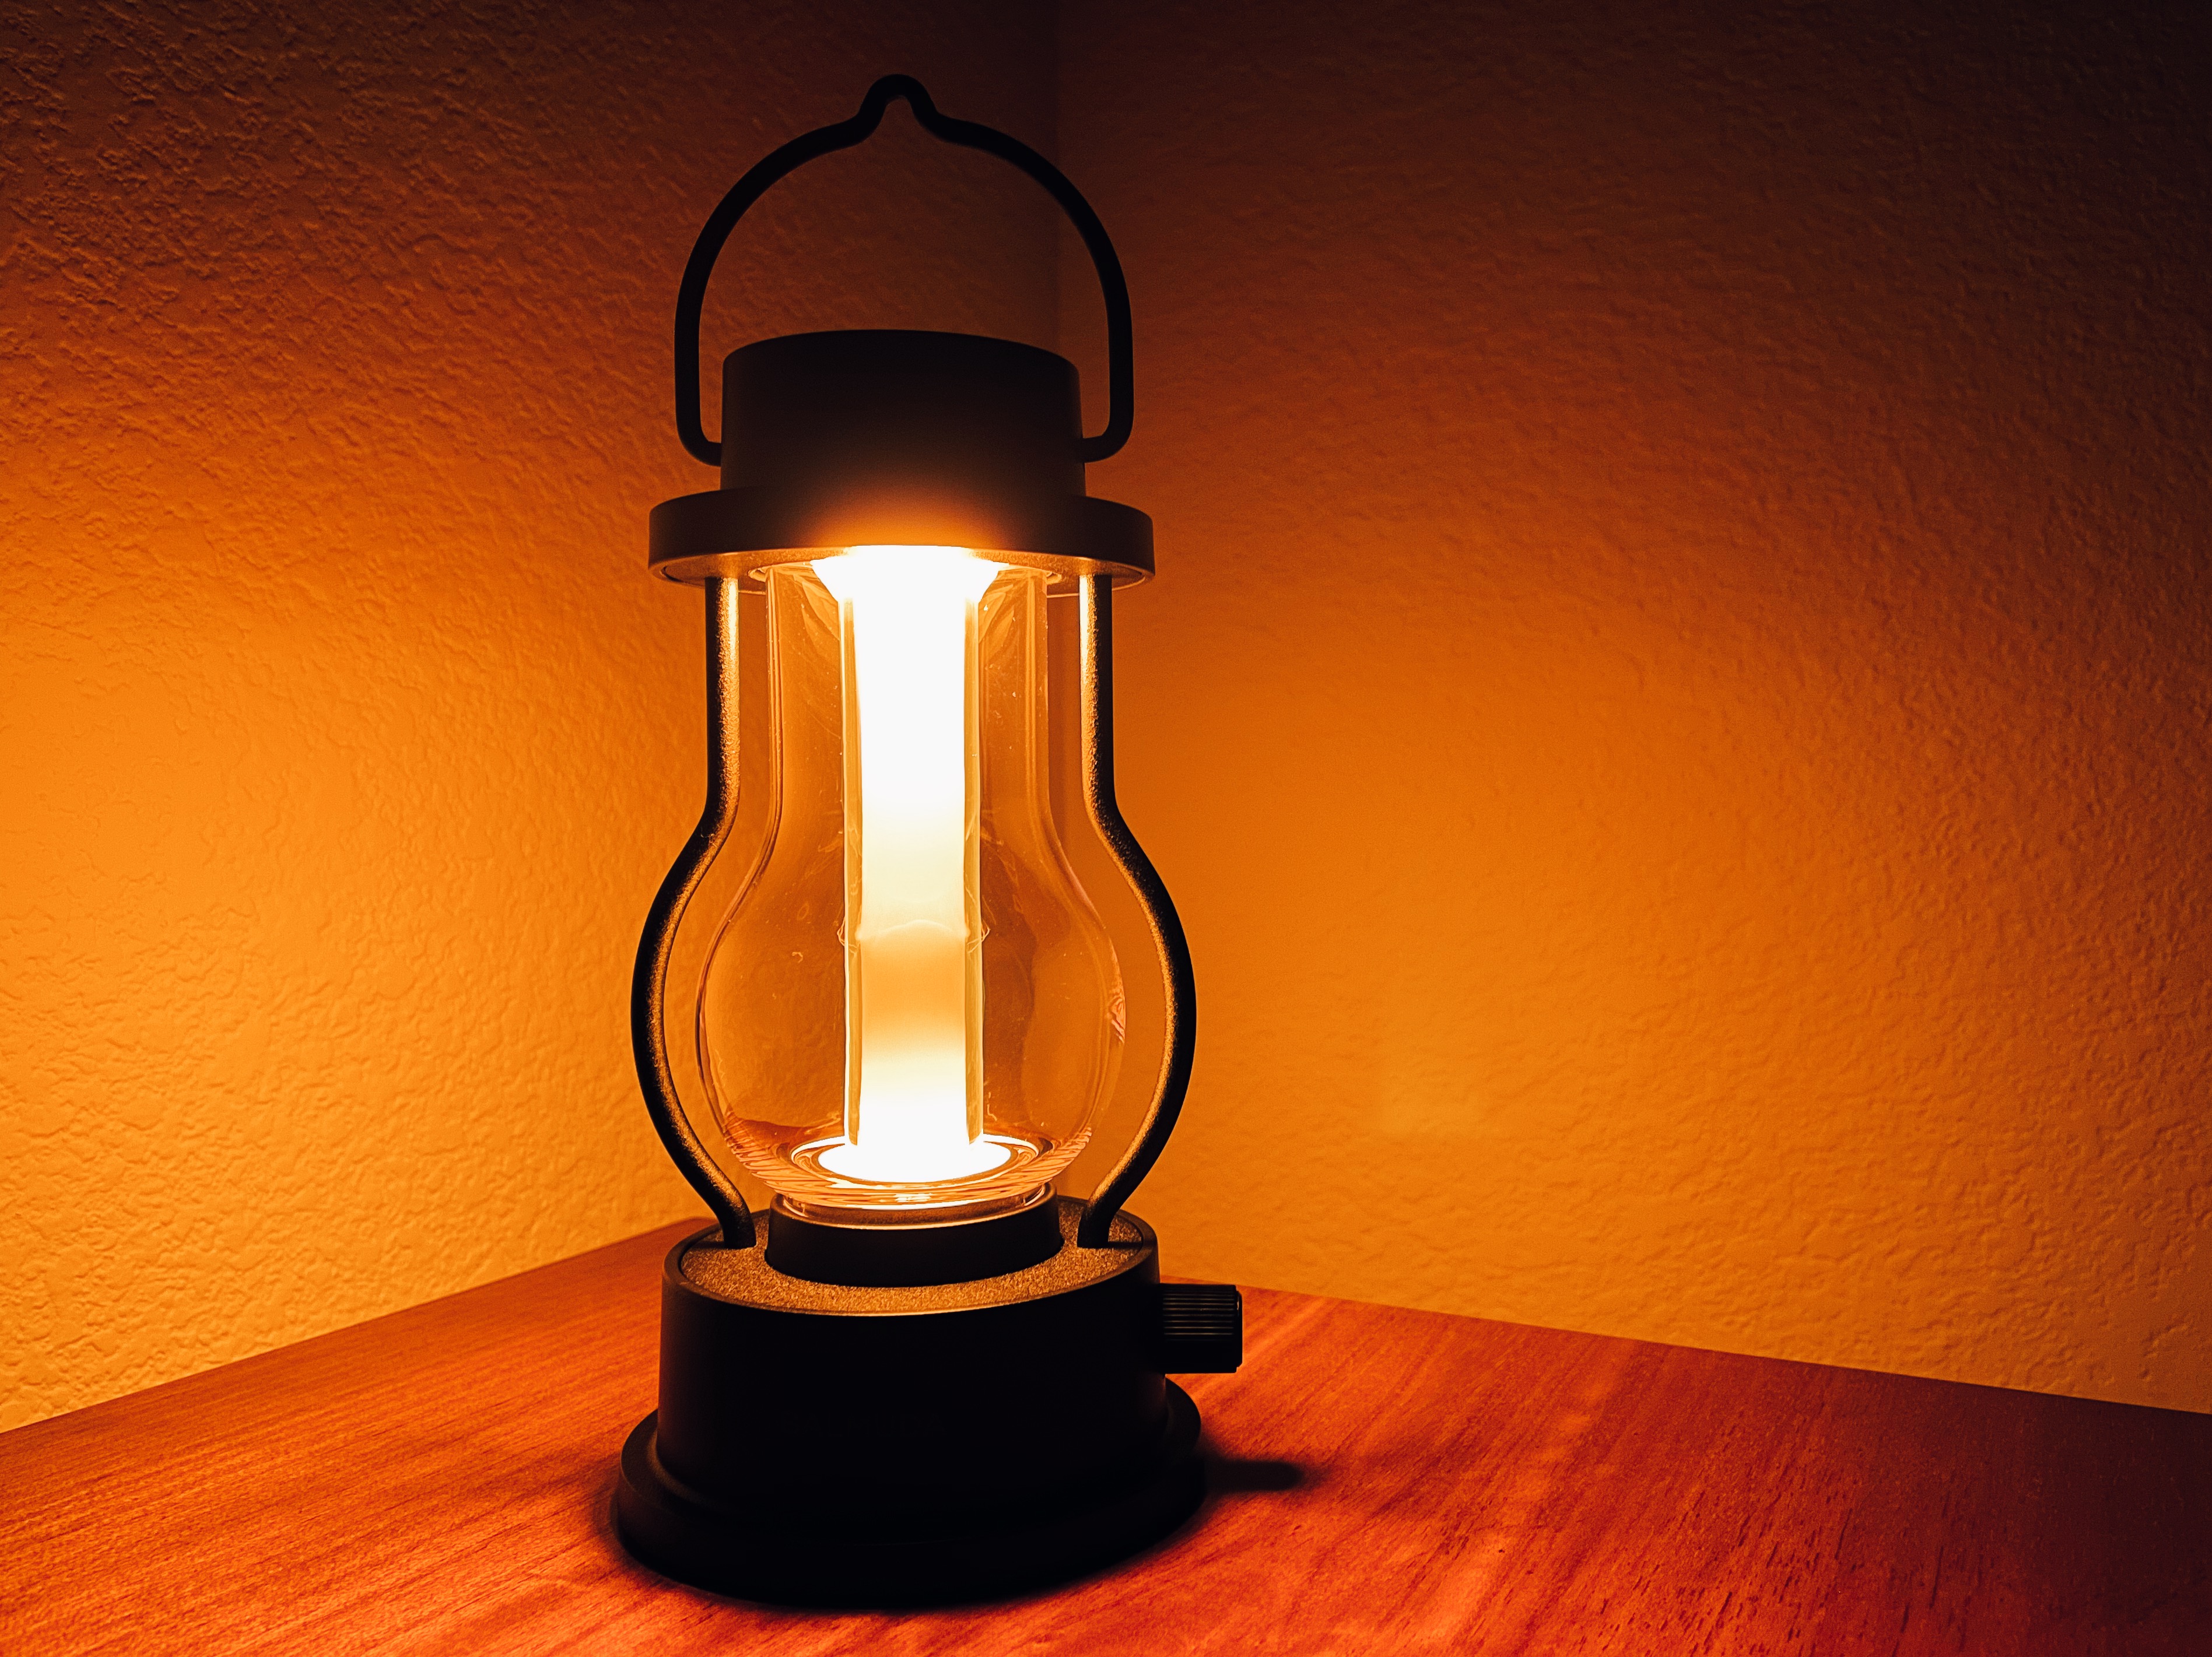 Balmuda Lantern Review: A Designer Light that Works Outdoors and 